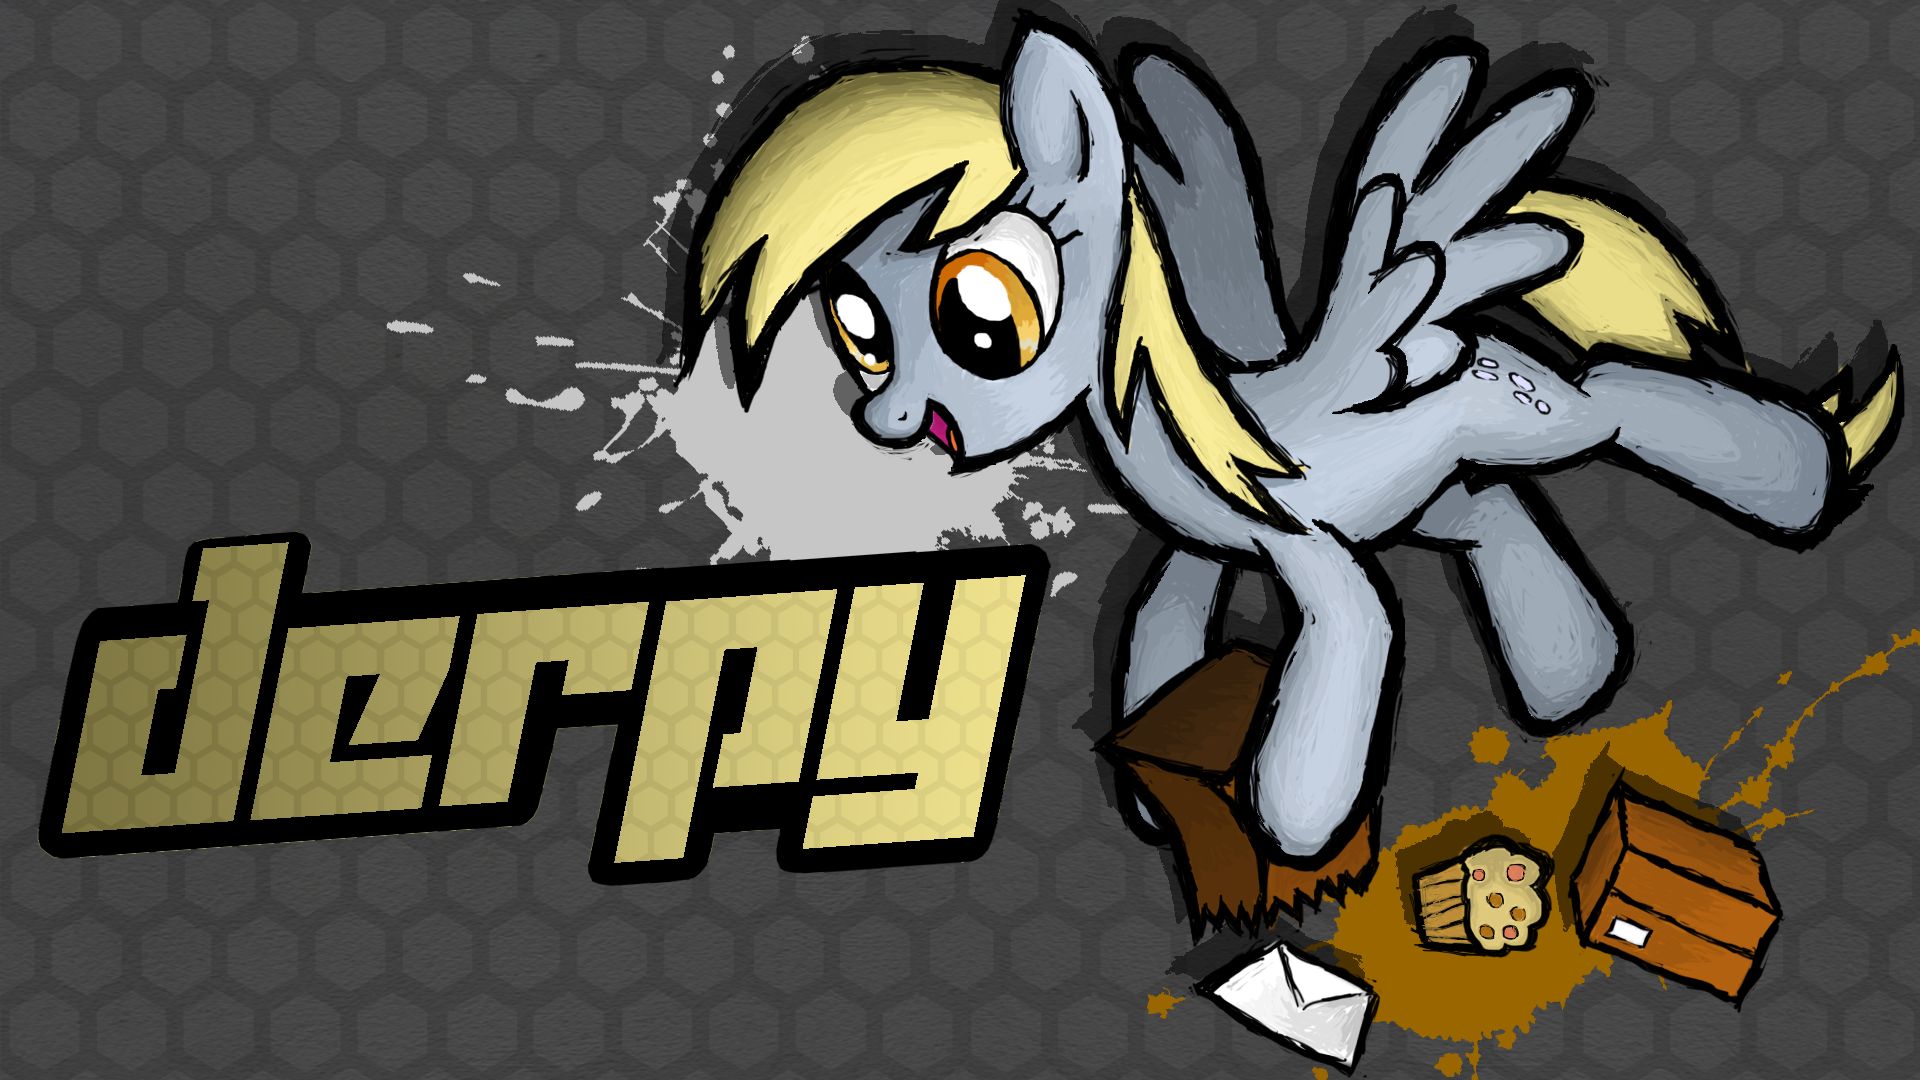 Derpy Hooves Images Romantic Derpy Hd Wallpaper And  Derpy Mlp  Free  Transparent PNG Download  PNGkey